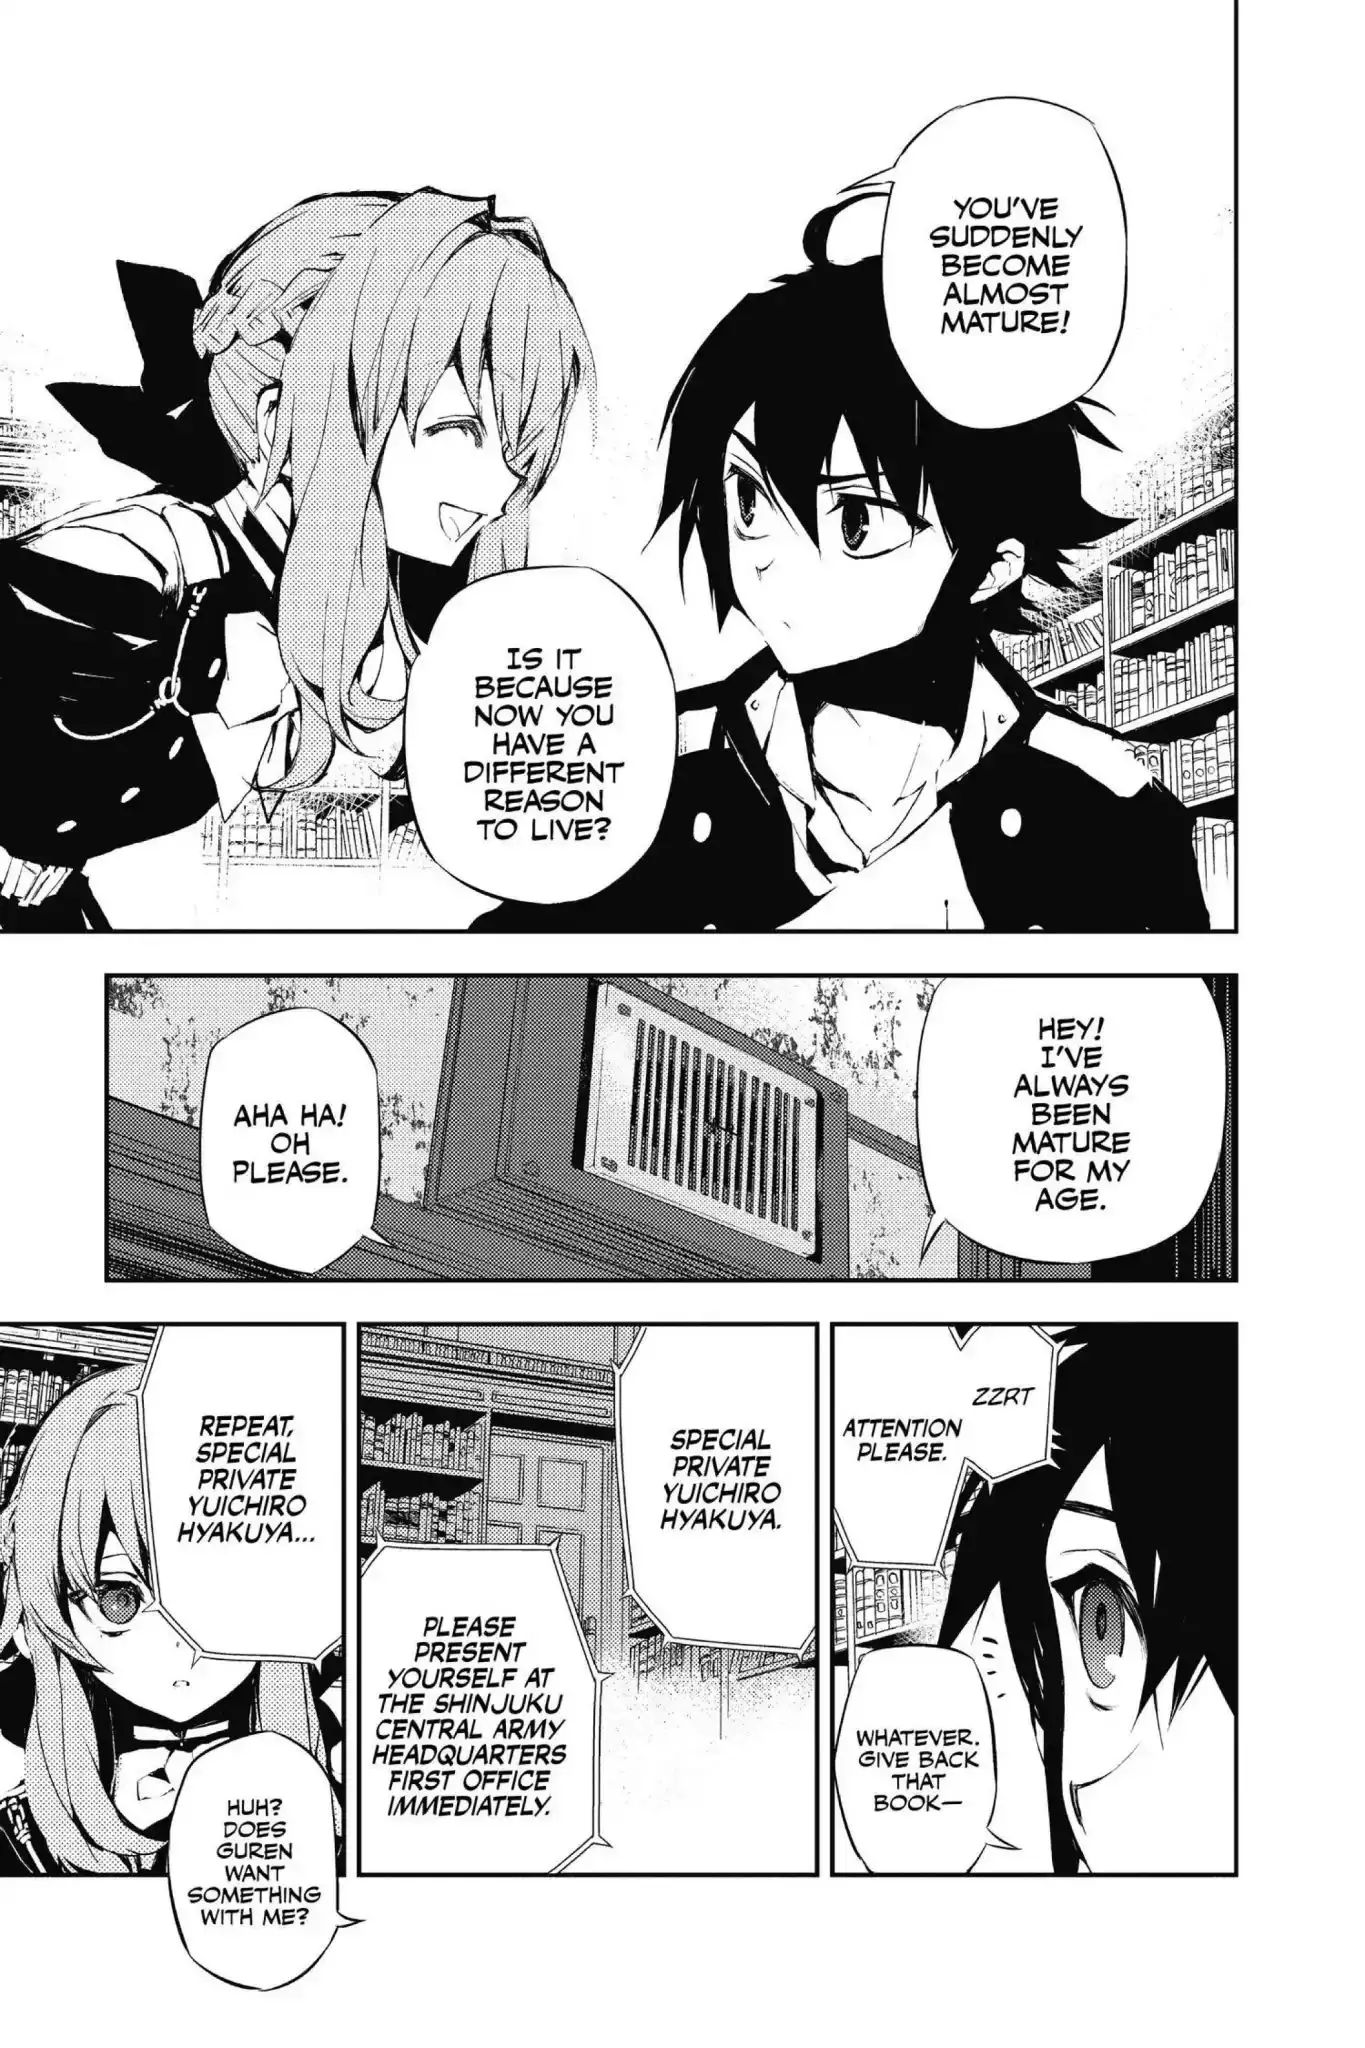 Seraph Of The End - 16 page 17-73ae32e0